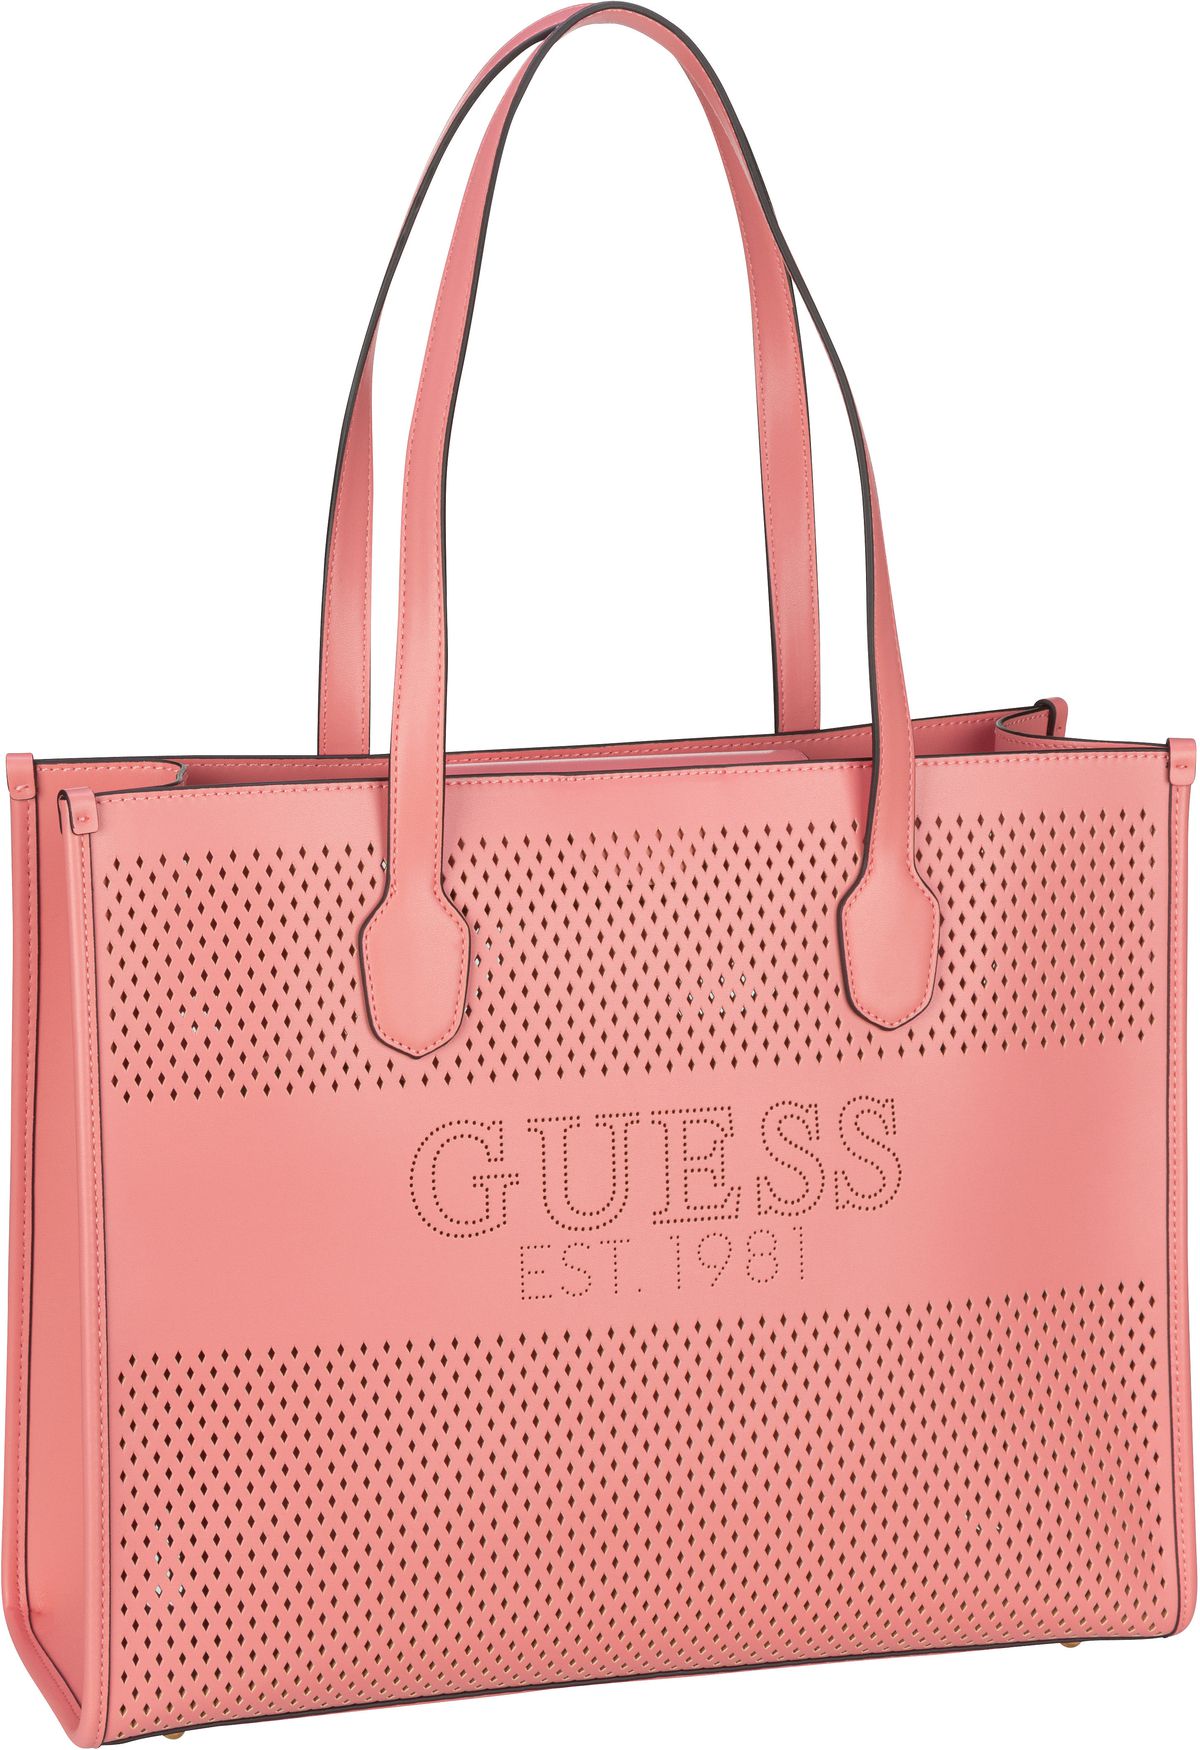 Guess Katey Tote WH - Pink